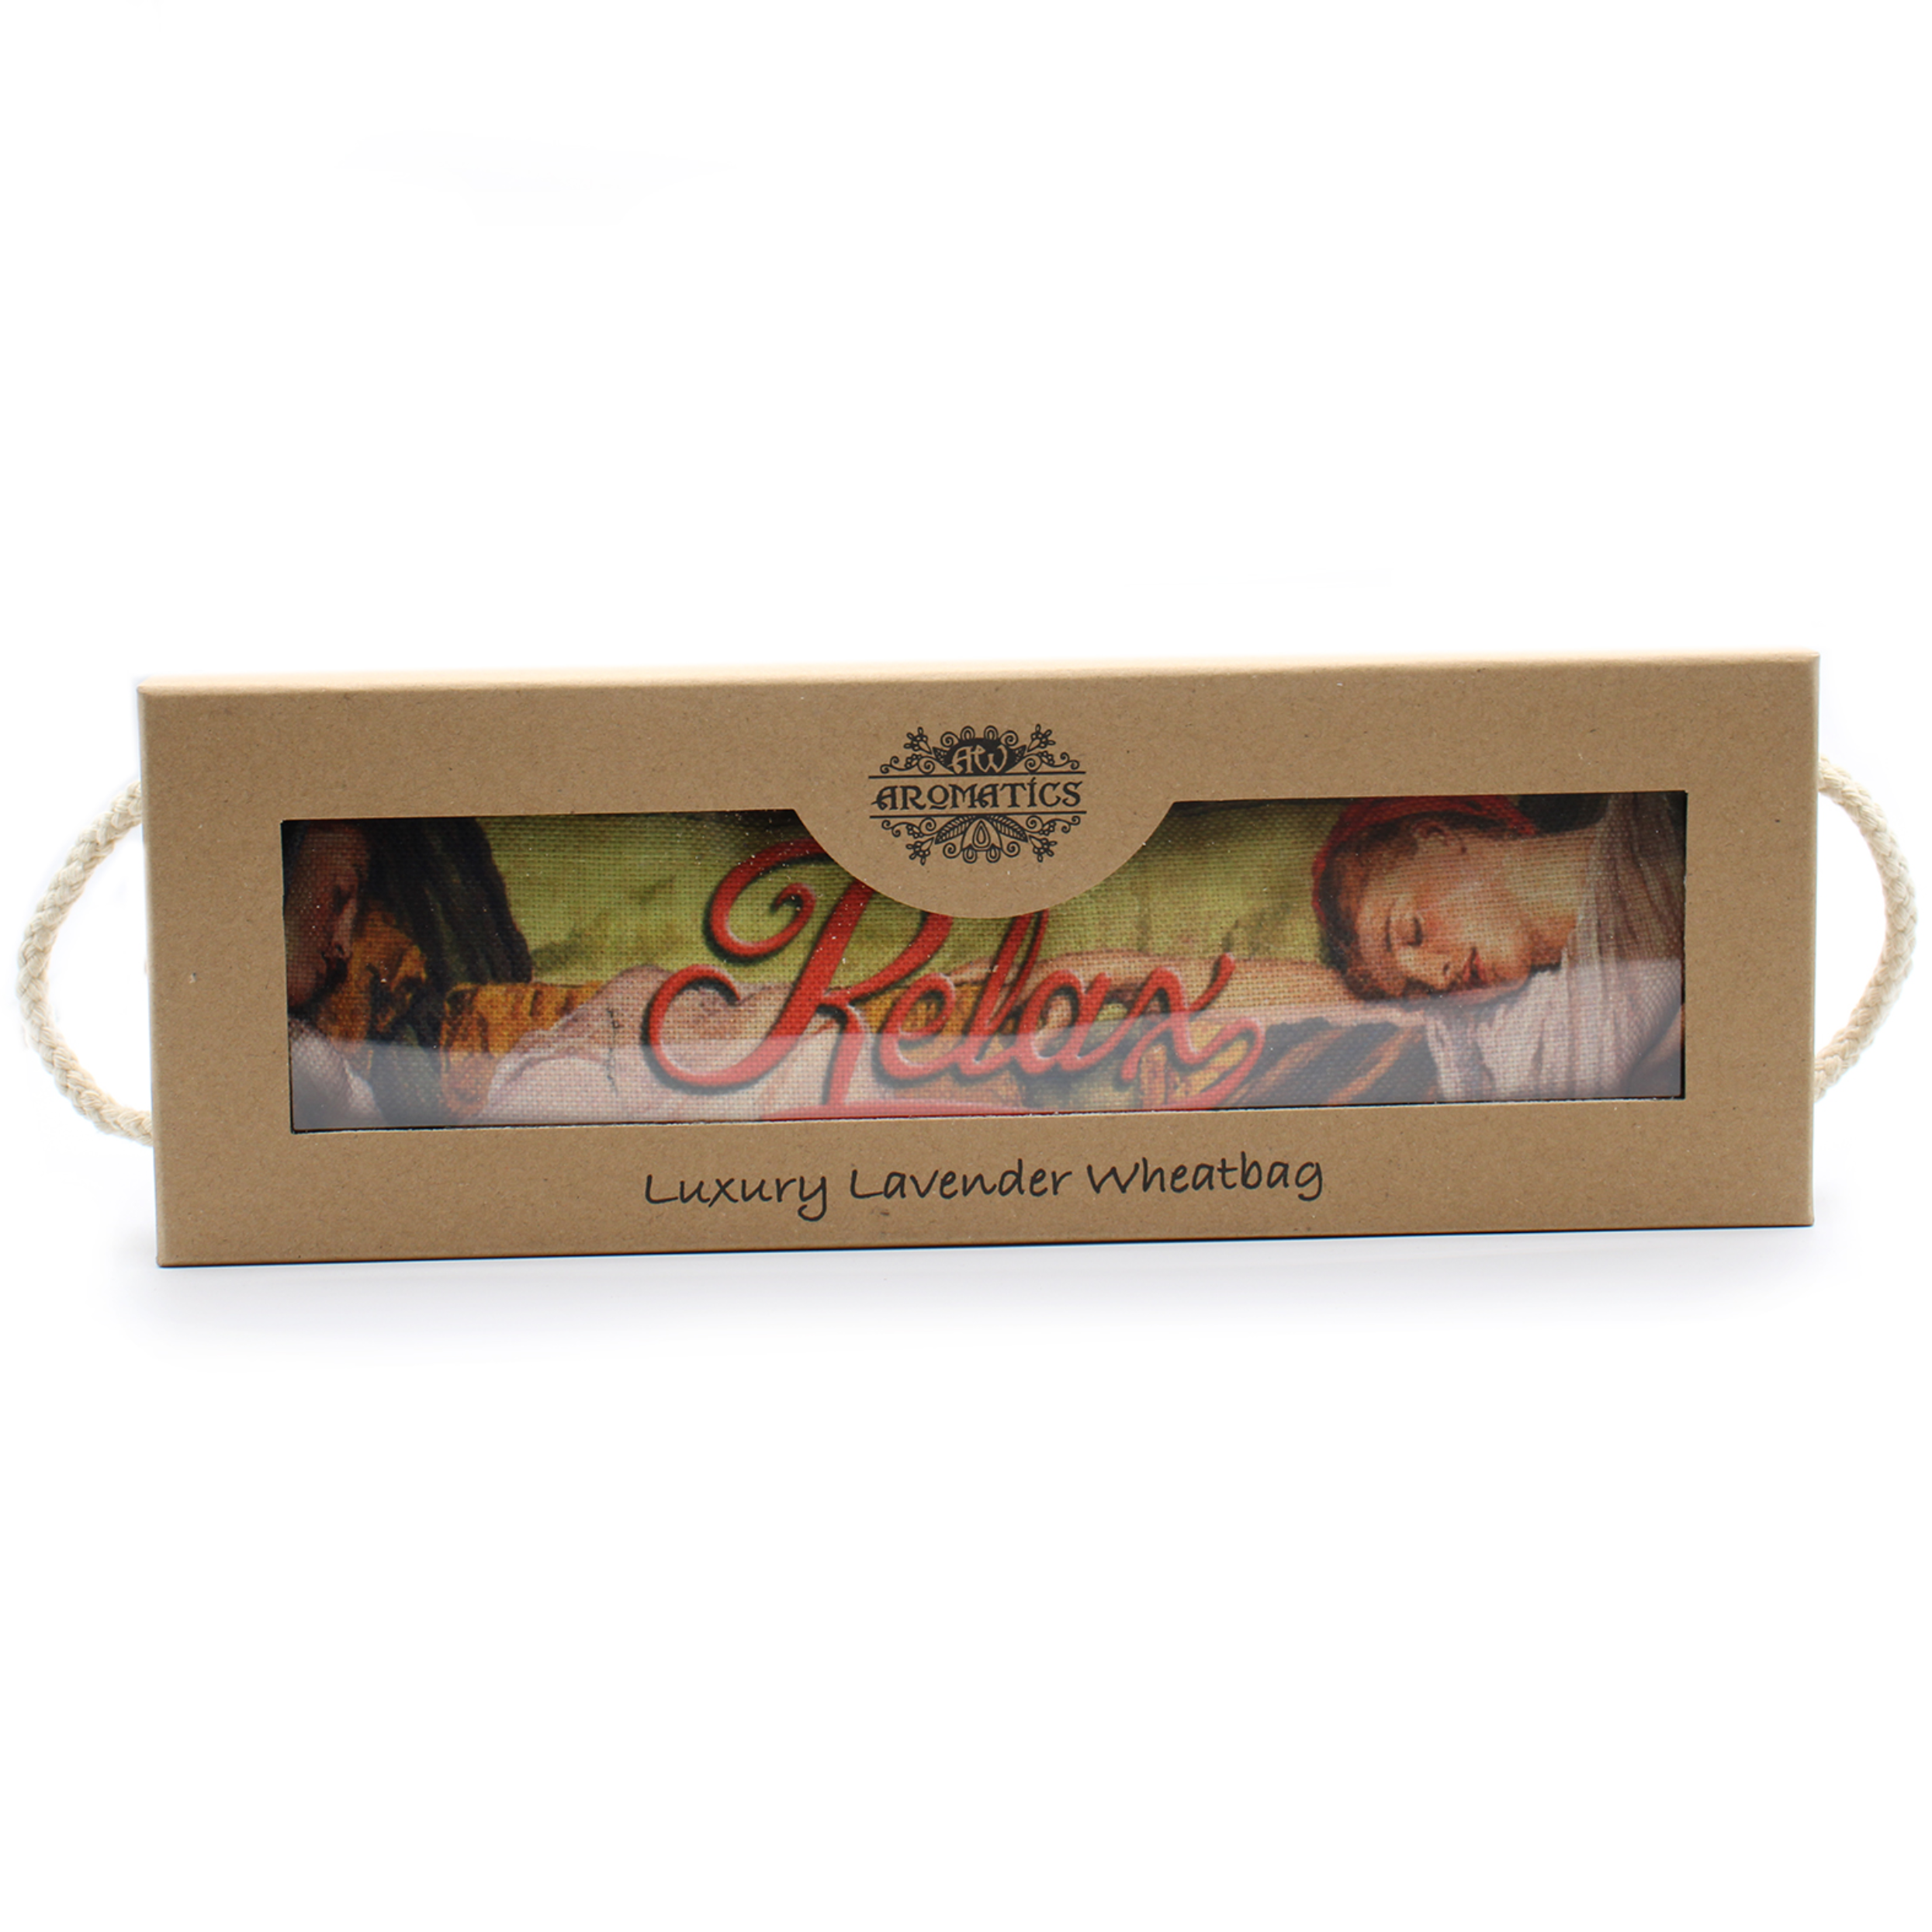 Sleeping Relax - Luxury Lavender Wheat Bag in Gift Box